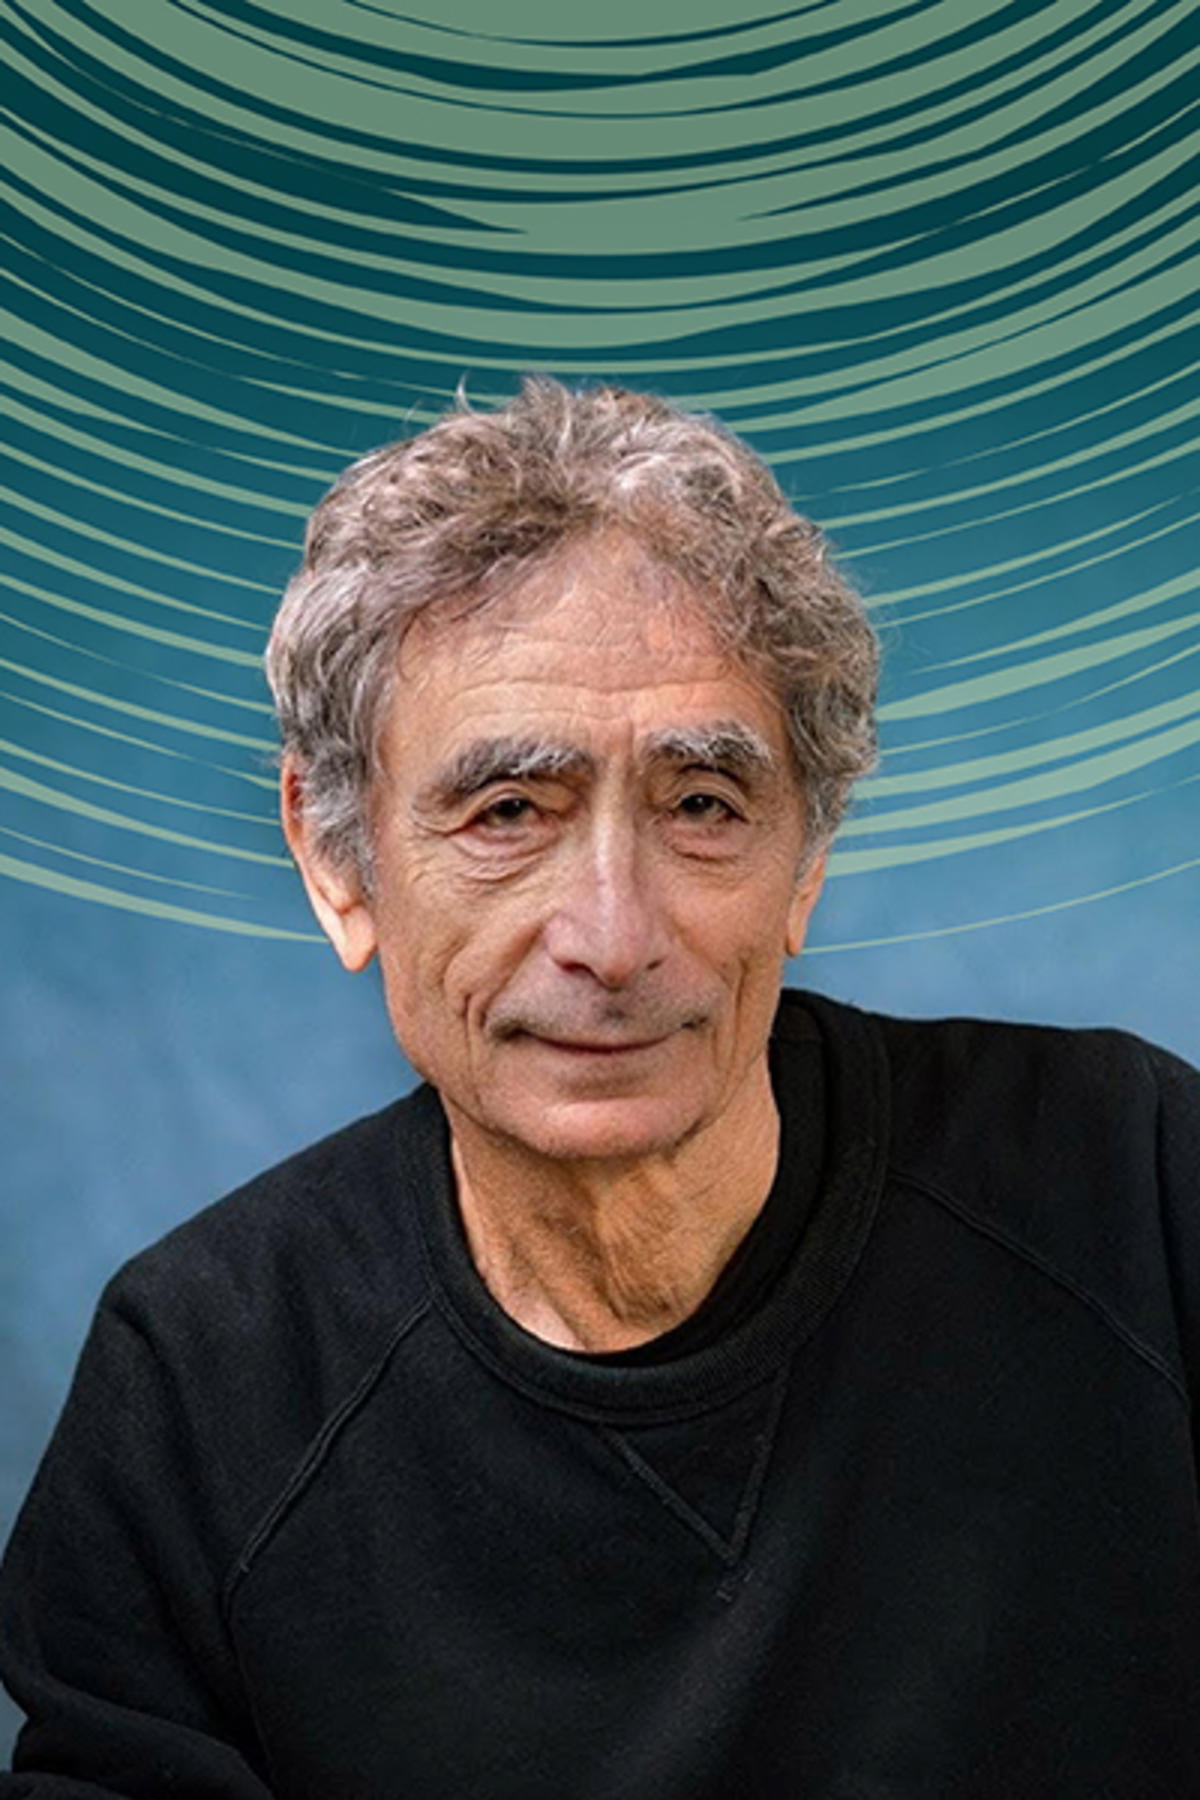 Dr. Gabor Maté color portrait. Dr. Maté is a Canadian-Hungarian older white man who is posed in front of a soft blue background and is wearing a dark-colored sweatshirt.